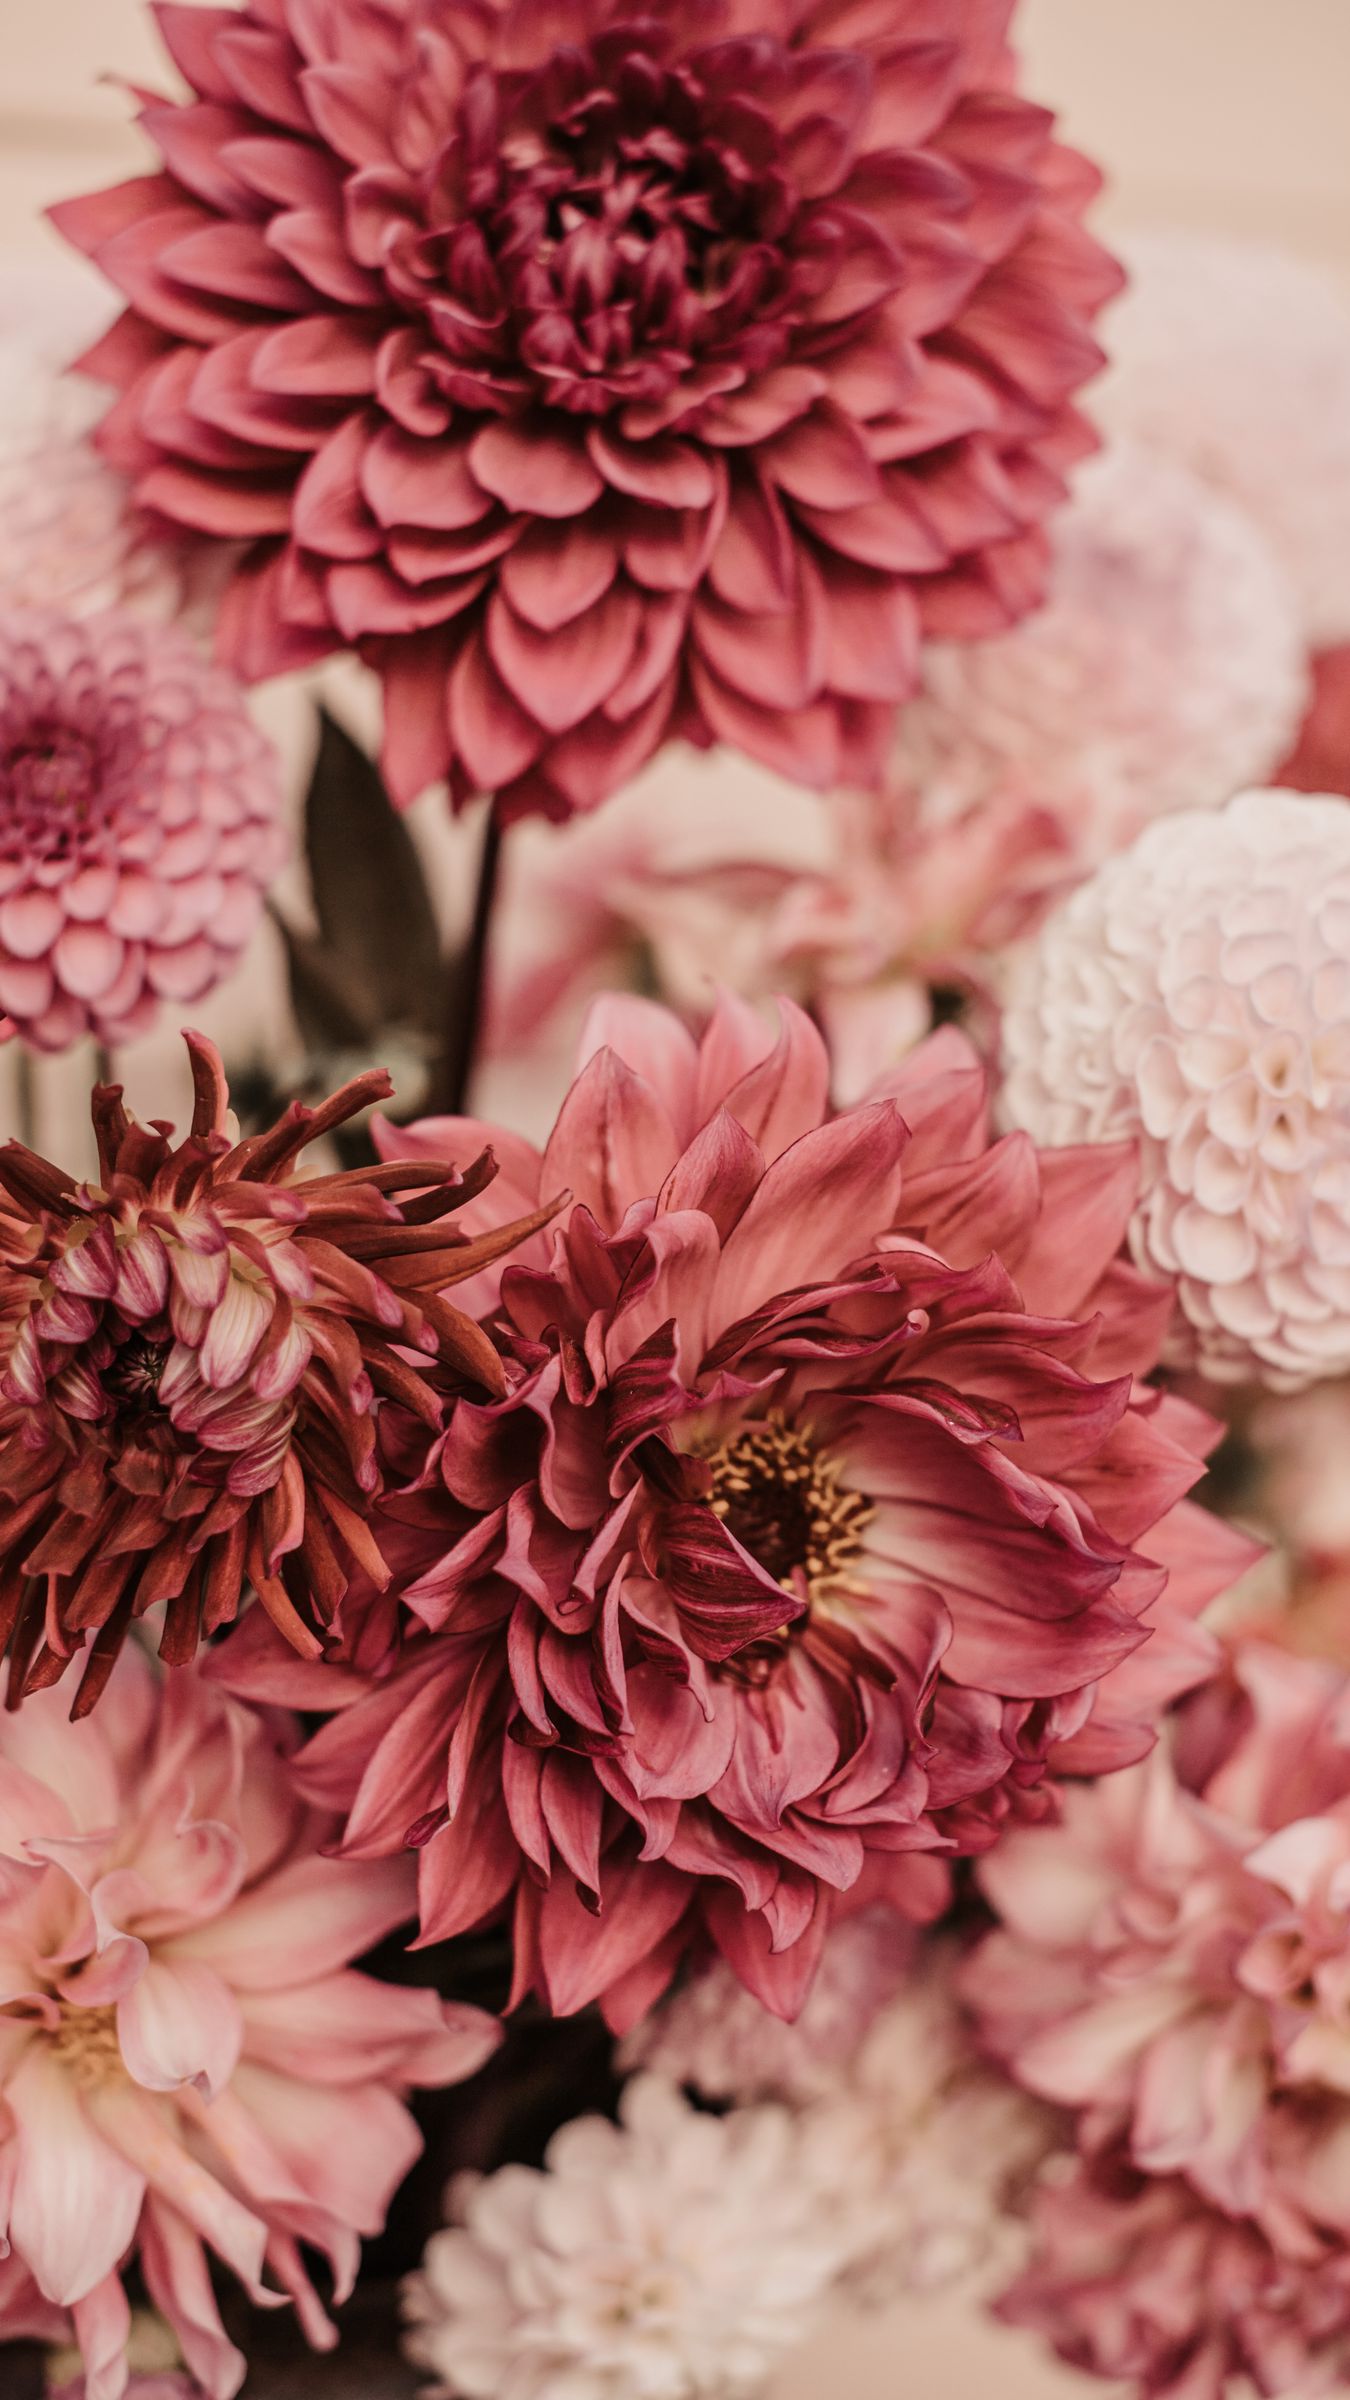 dahlias 1080P 2k 4k Full HD Wallpapers Backgrounds Free Download   Wallpaper Crafter